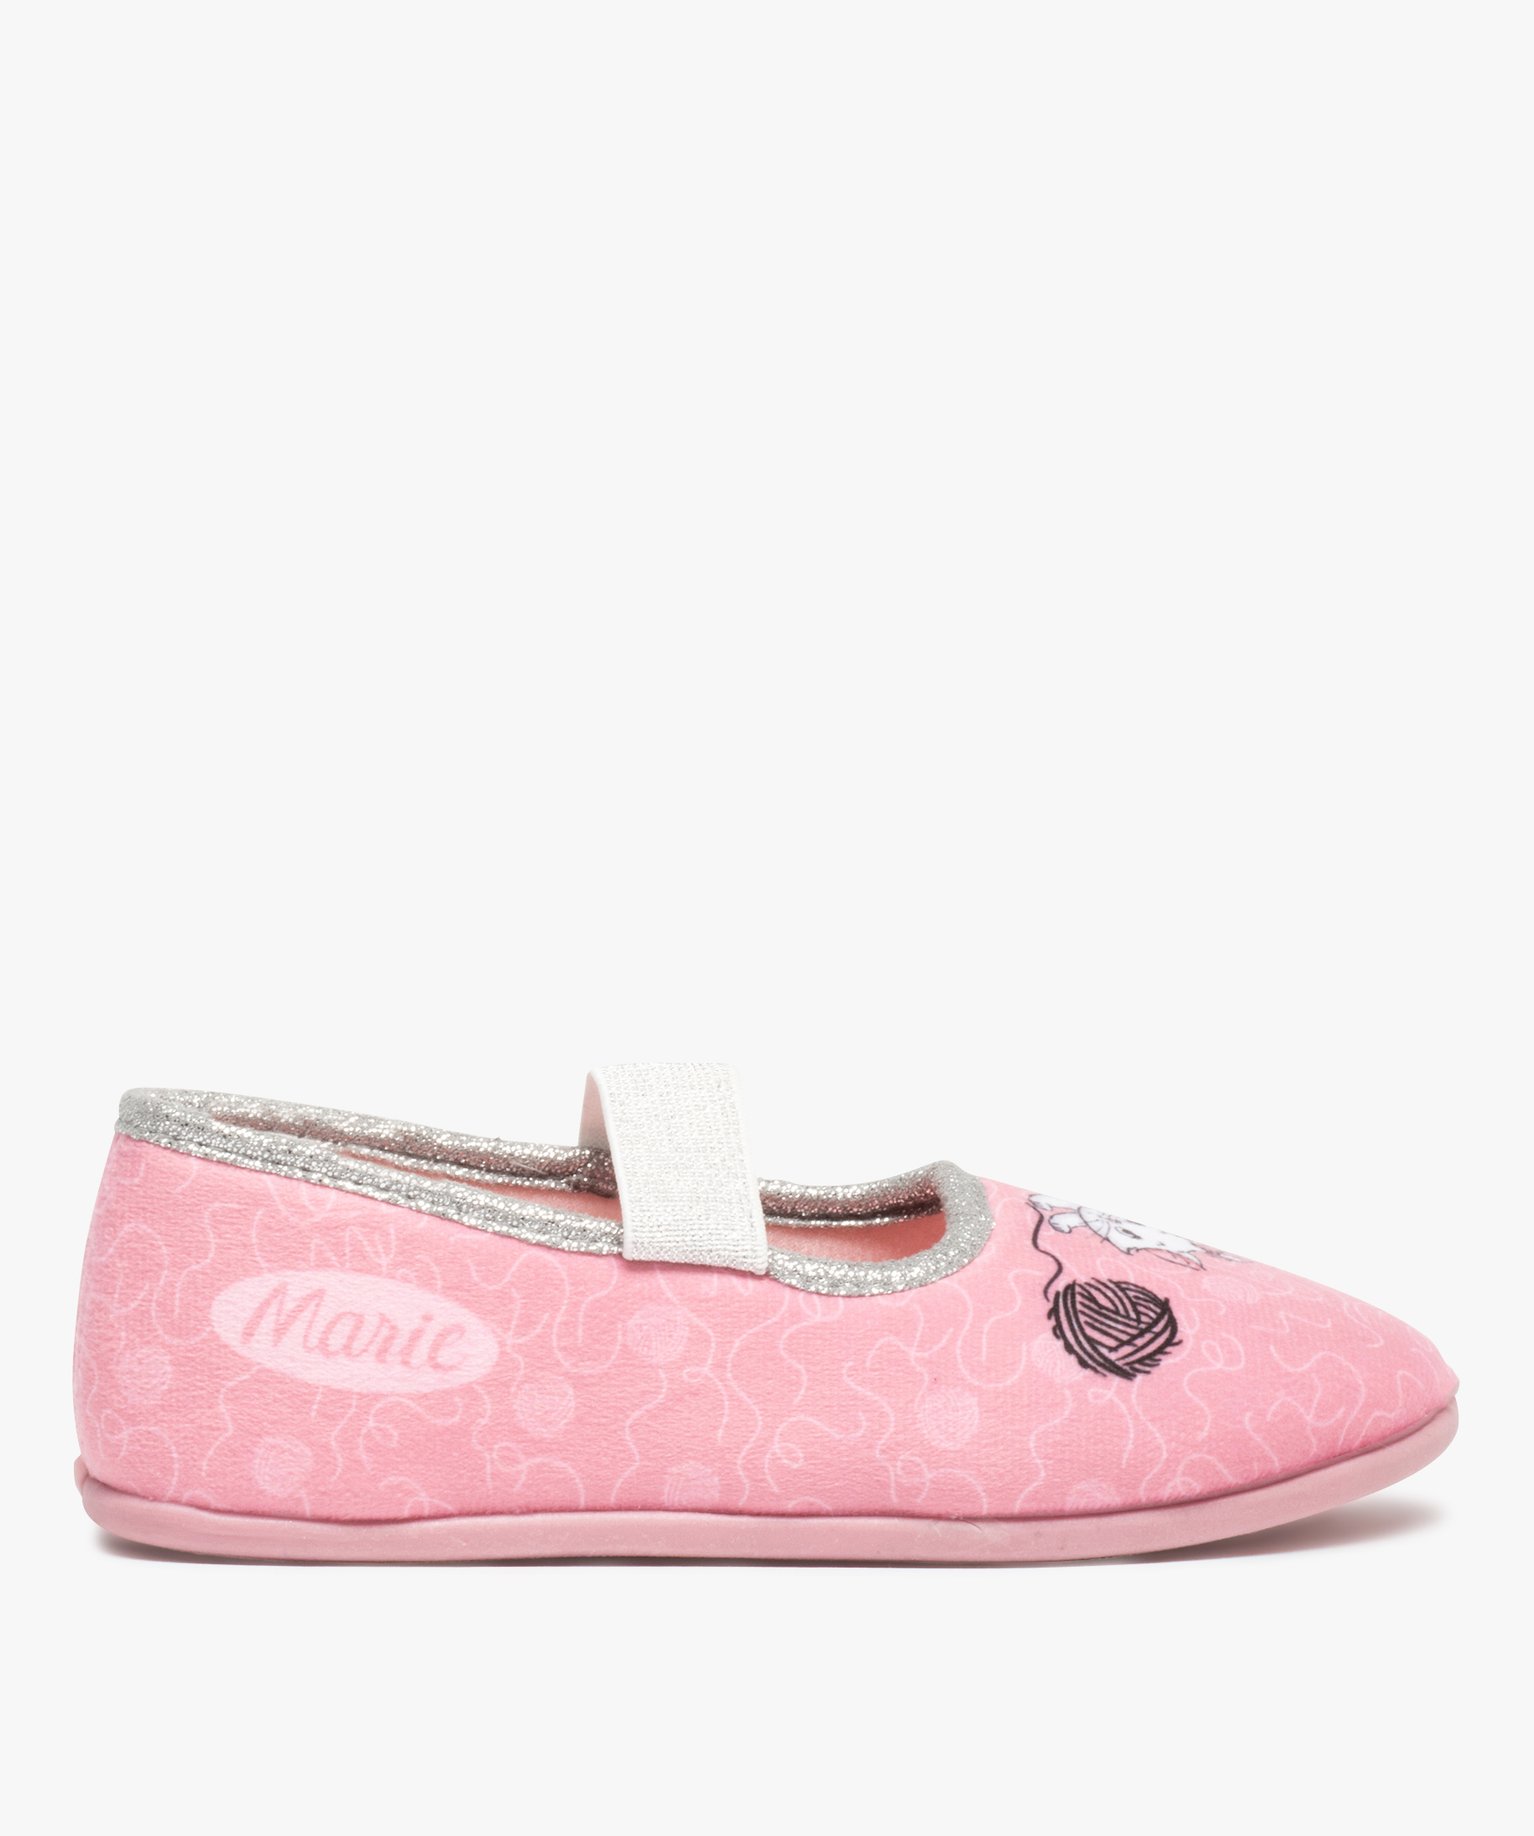 chaussons fille ballerines les aristochats - disney rose